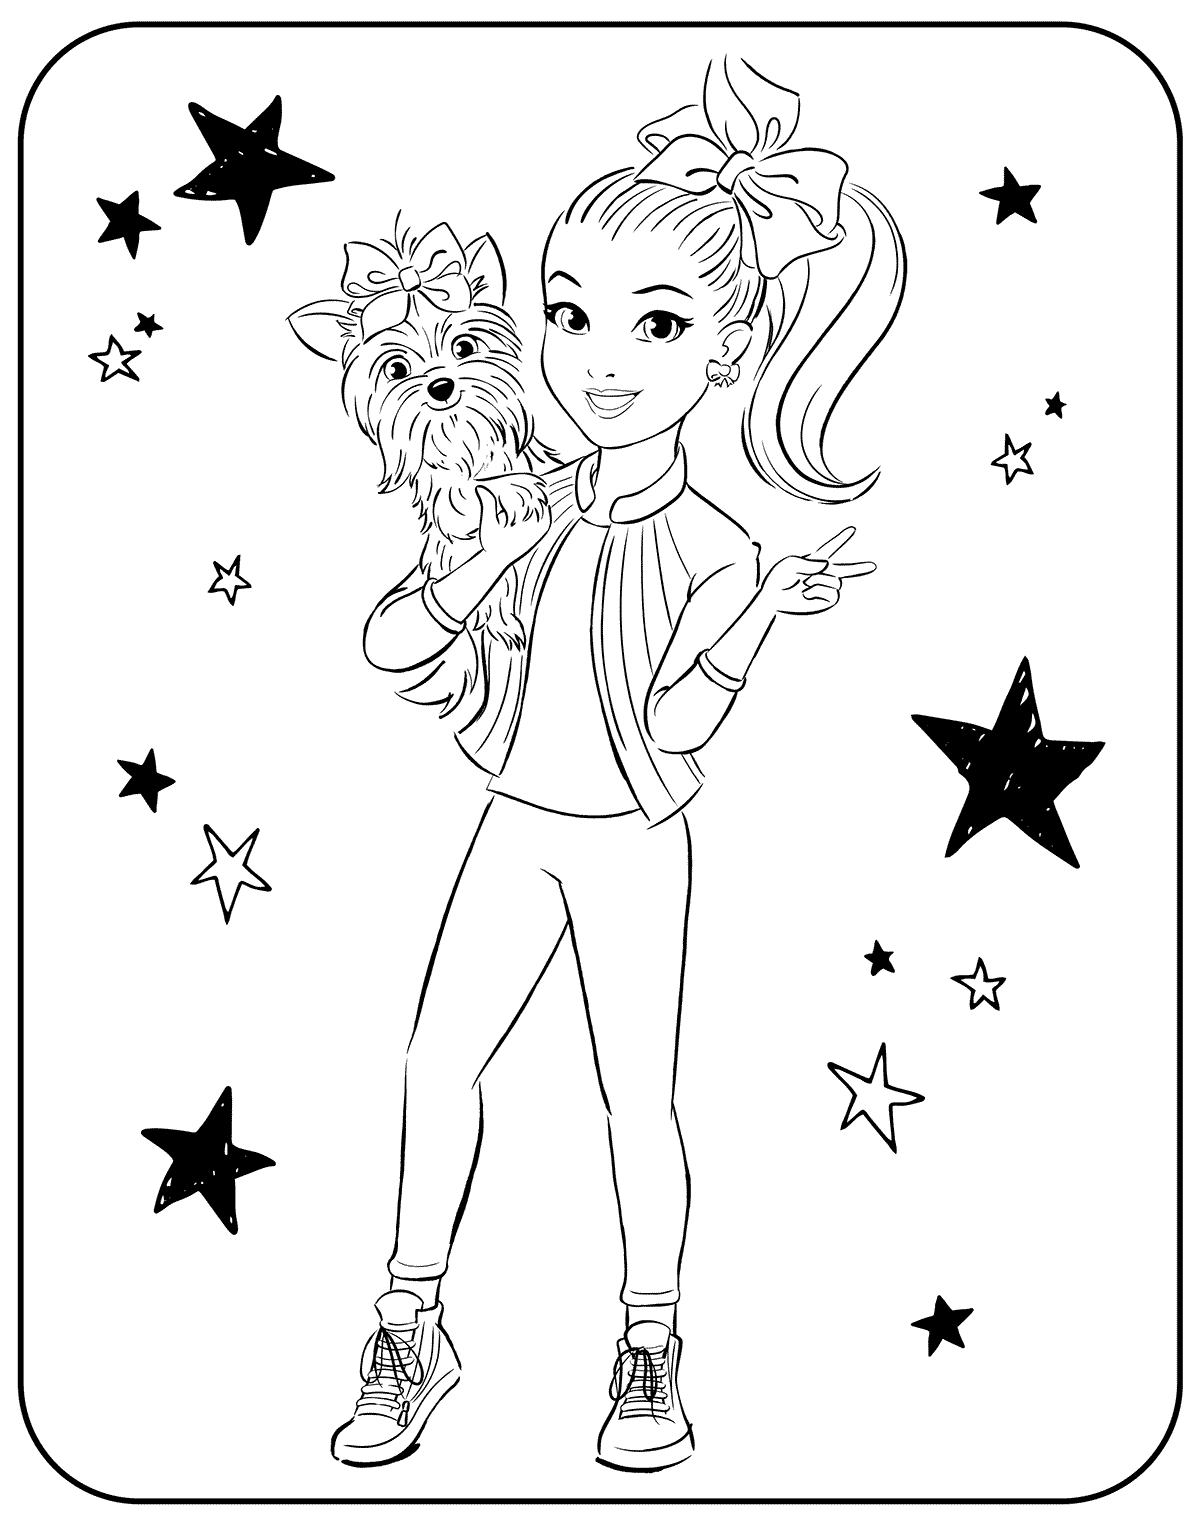 Active sport Bow Bow and Jojo Siwa play together Coloring Pages ...